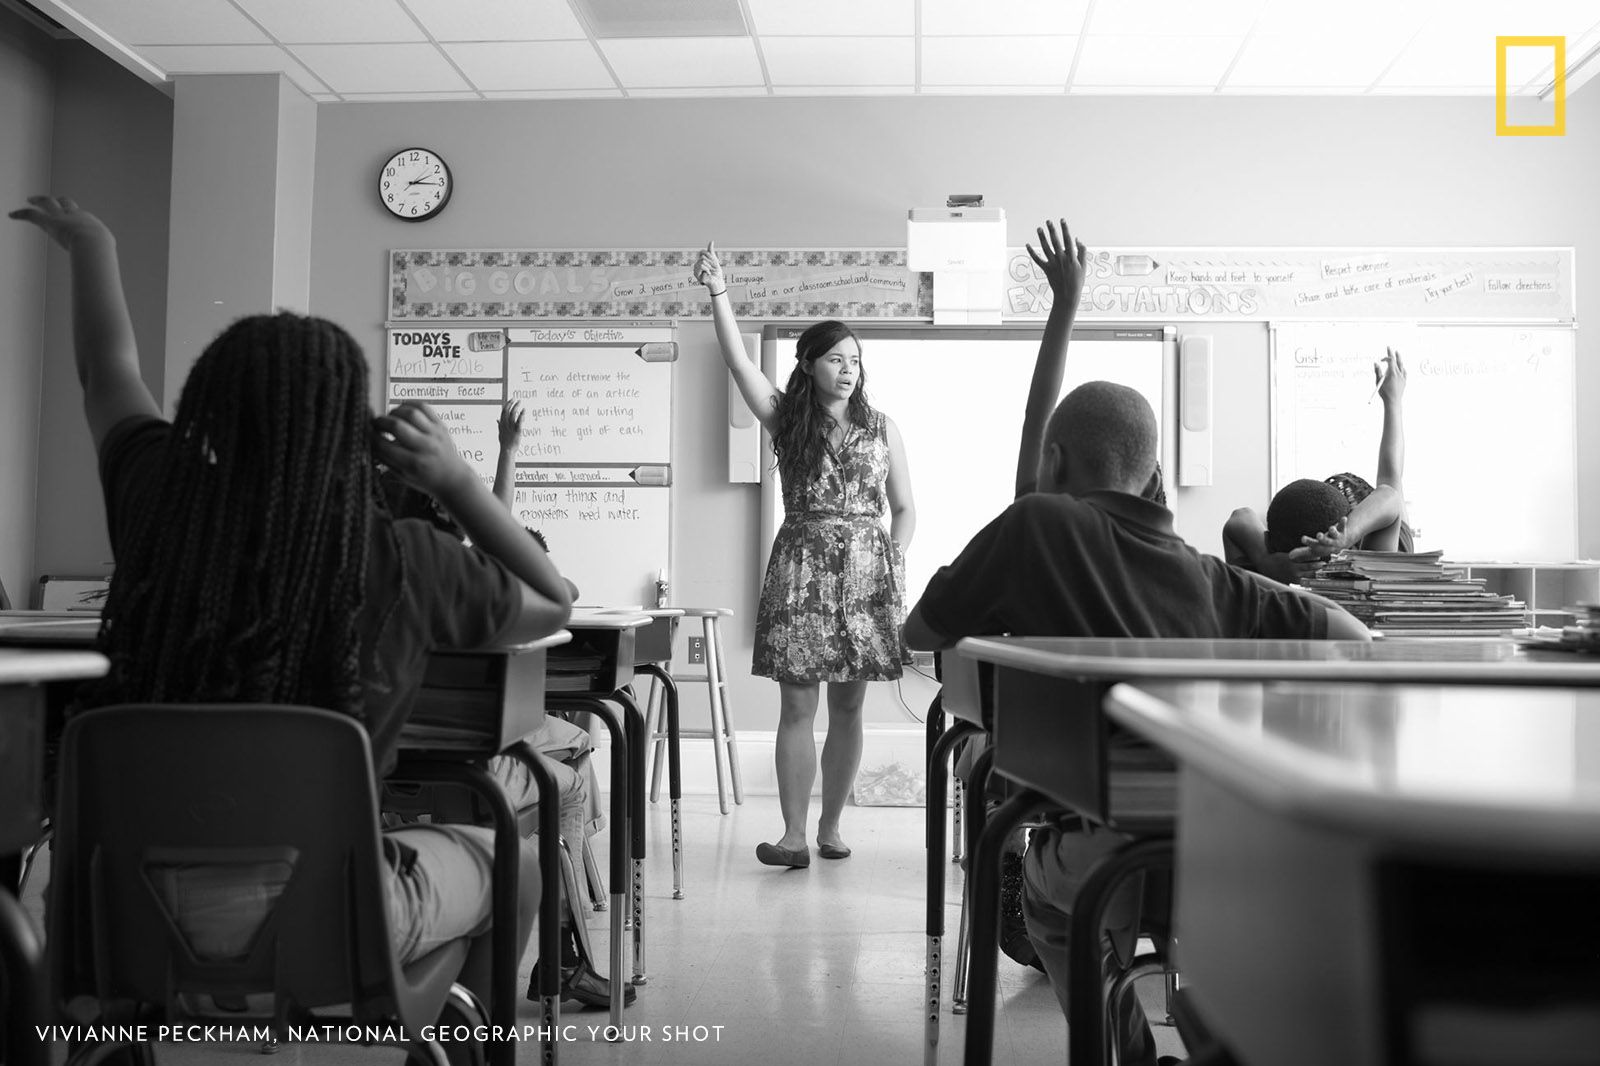 About 70% of K-12 teachers in the U.S. are women. Here English Language Arts teacher Allison Divino leads a class of 6th graders at ARISE Academy (@arise_newday) in New Orleans, LA. Teaching takes enormous stamina, commitment, and strong personal values. Every moment, dozens of eyes monitor how you react, how you treat their classmates, and whether you have something of value to bring to their lives. Image by Vivianne Peckham, National Geographic Your Shot.